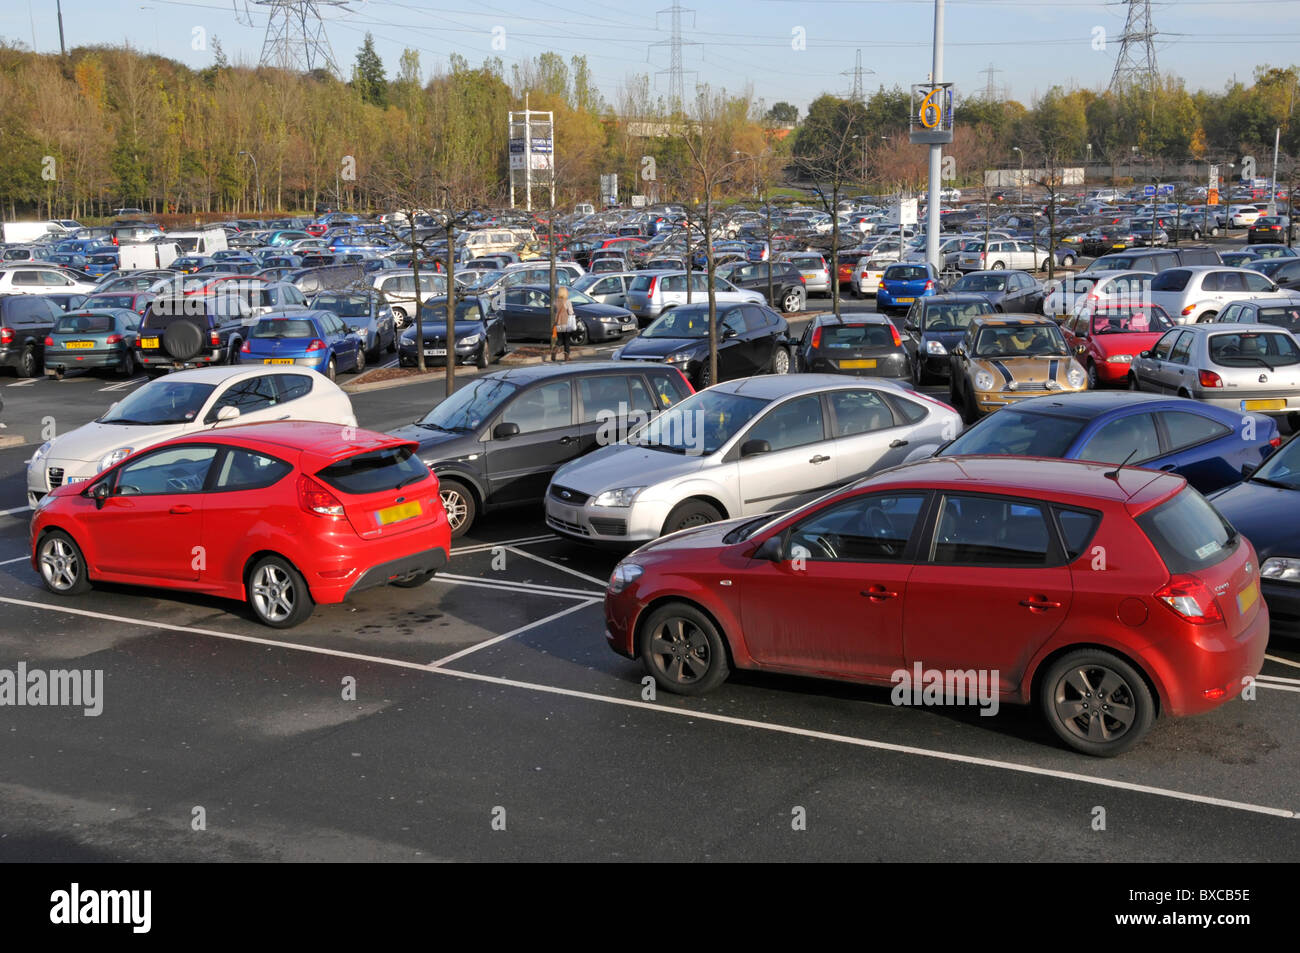 Shoppers free car parking outside Lakeside shopping complex Stock Photo